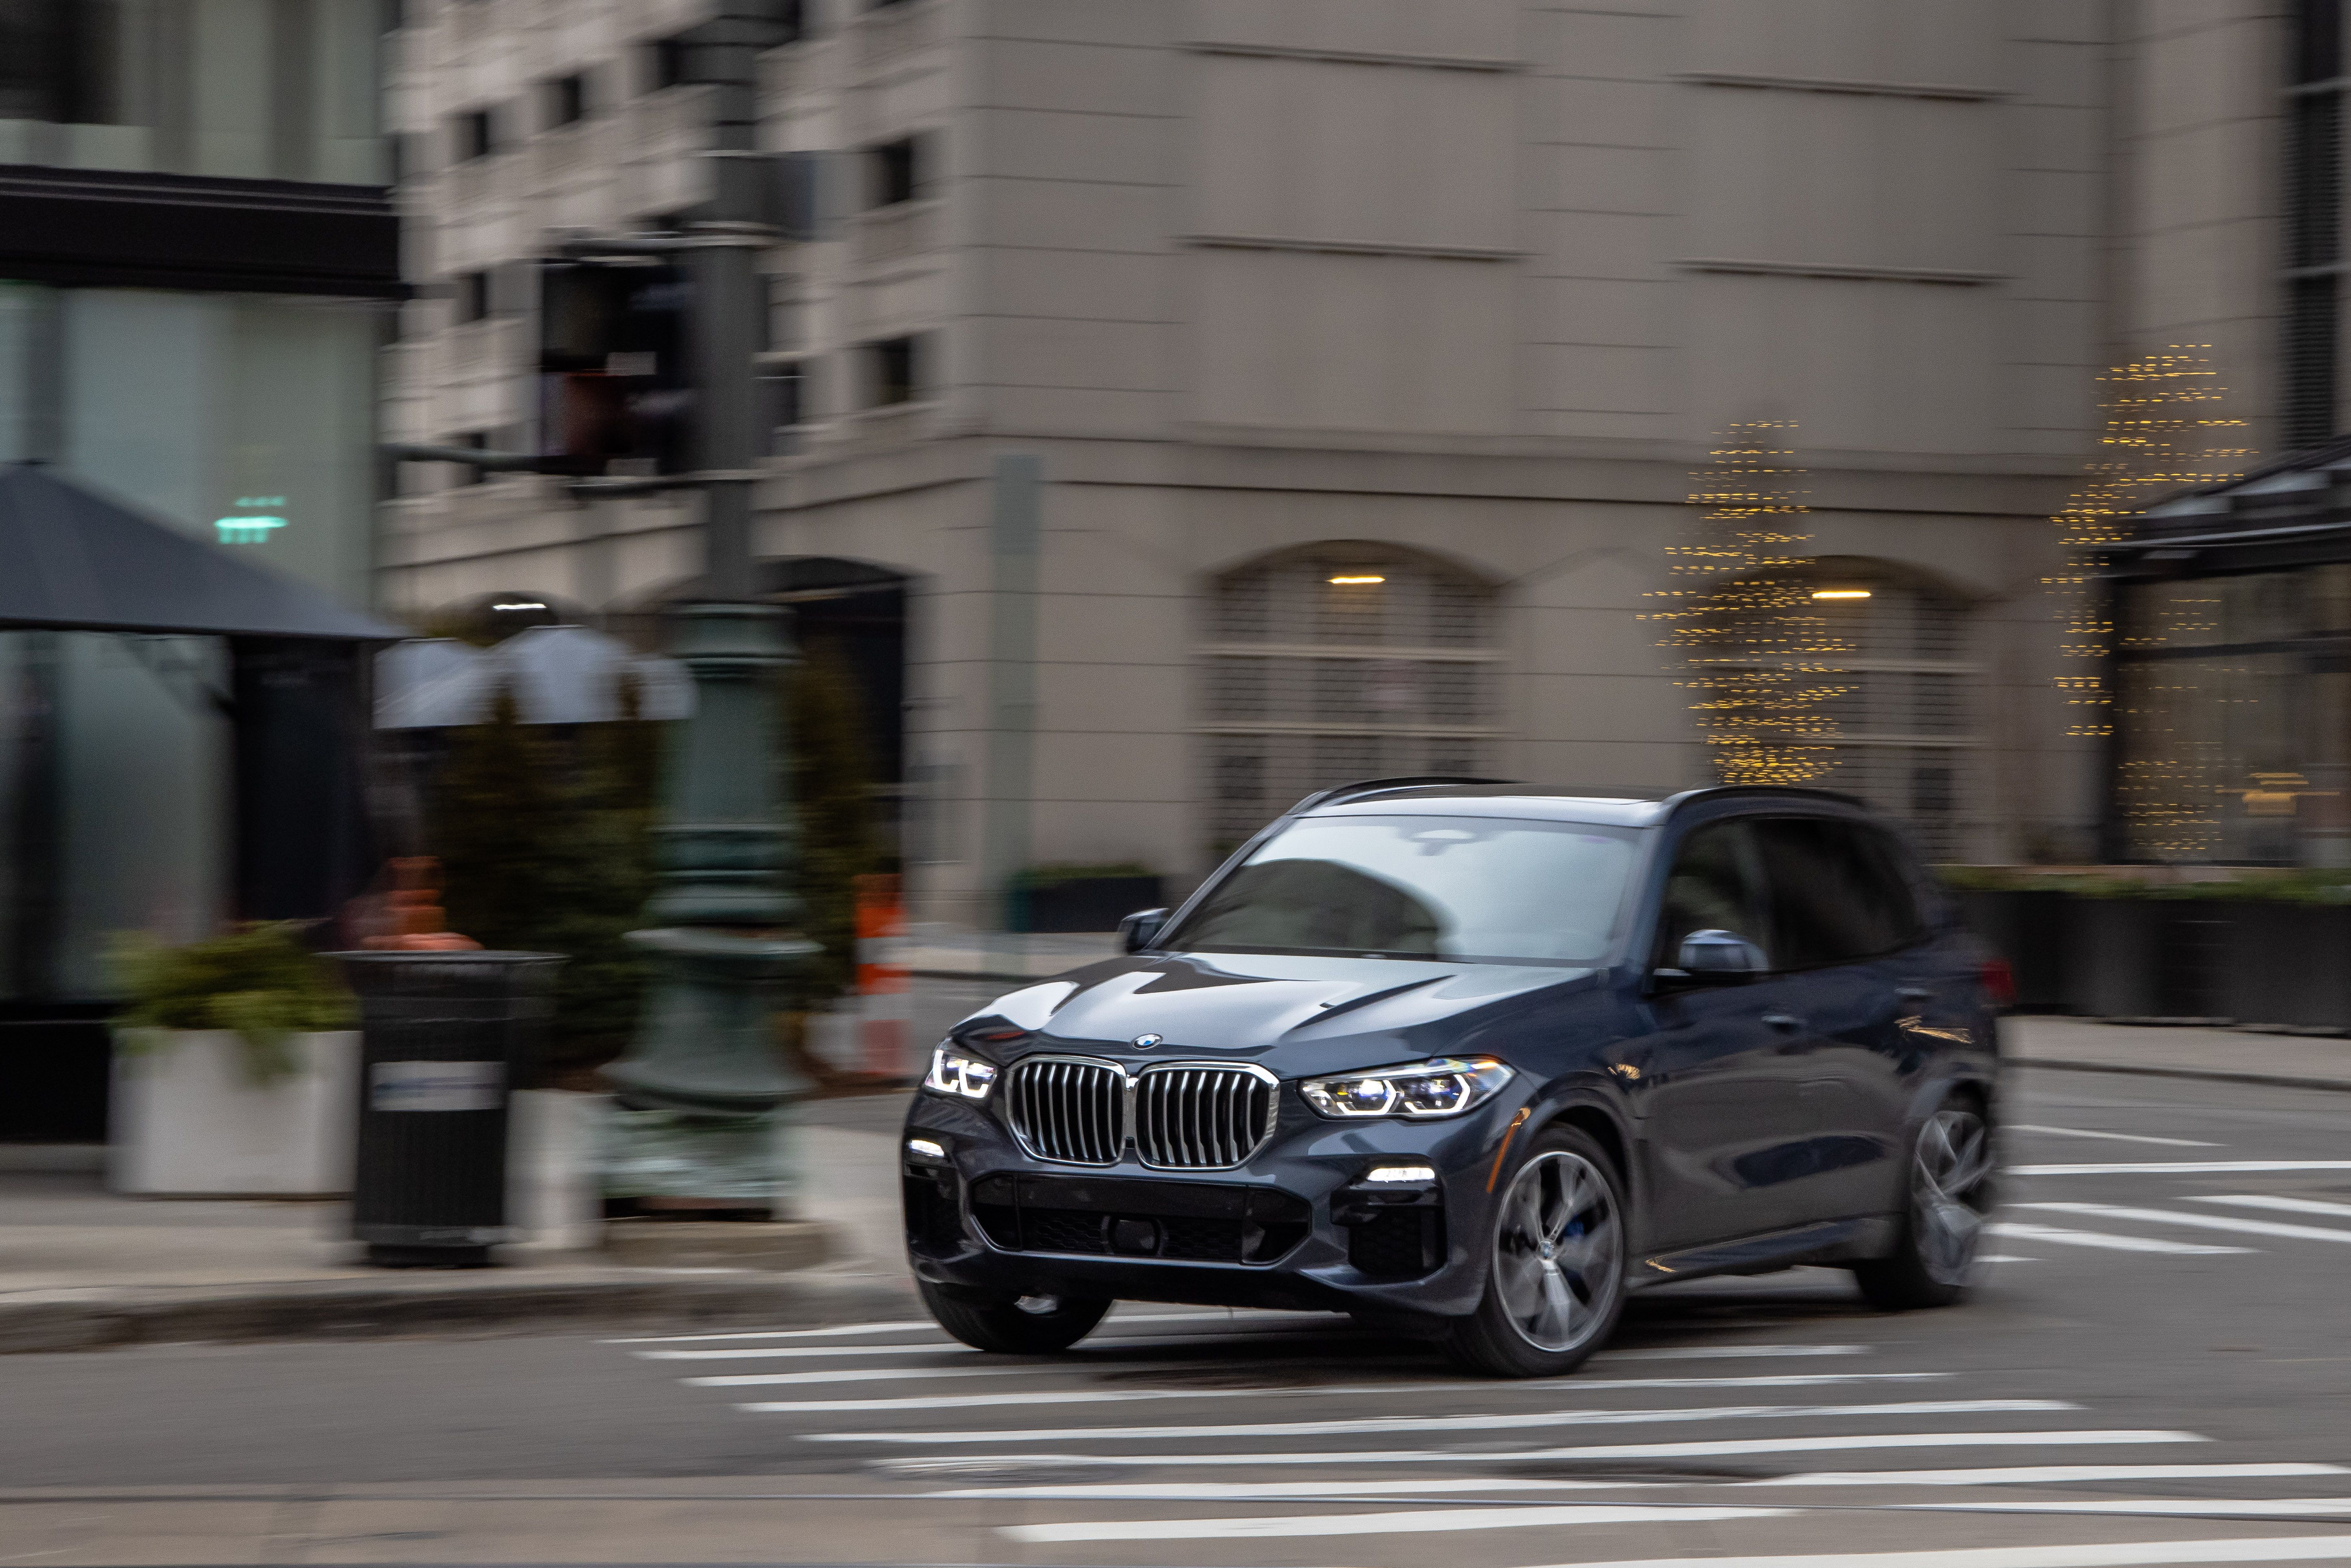 Tested: 2021 BMW X5 xDrive45e Prioritizes Quickness and Range